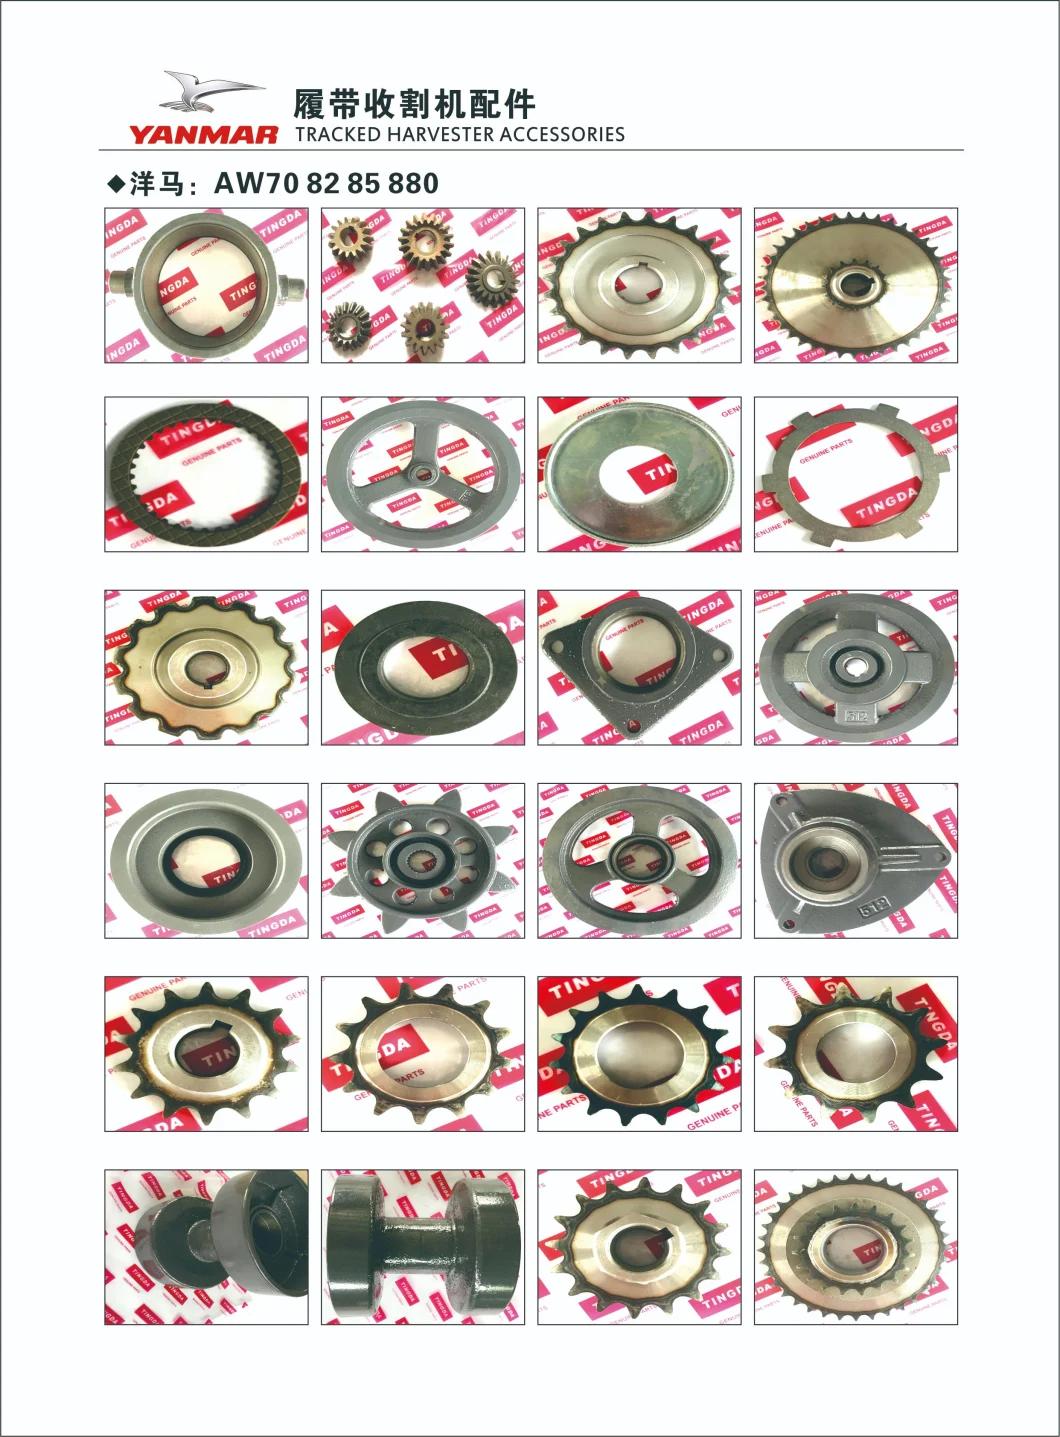 China Factory Supply Agricultural Machinery Kubota Harvester Accessories Oil Seal 58813-16450